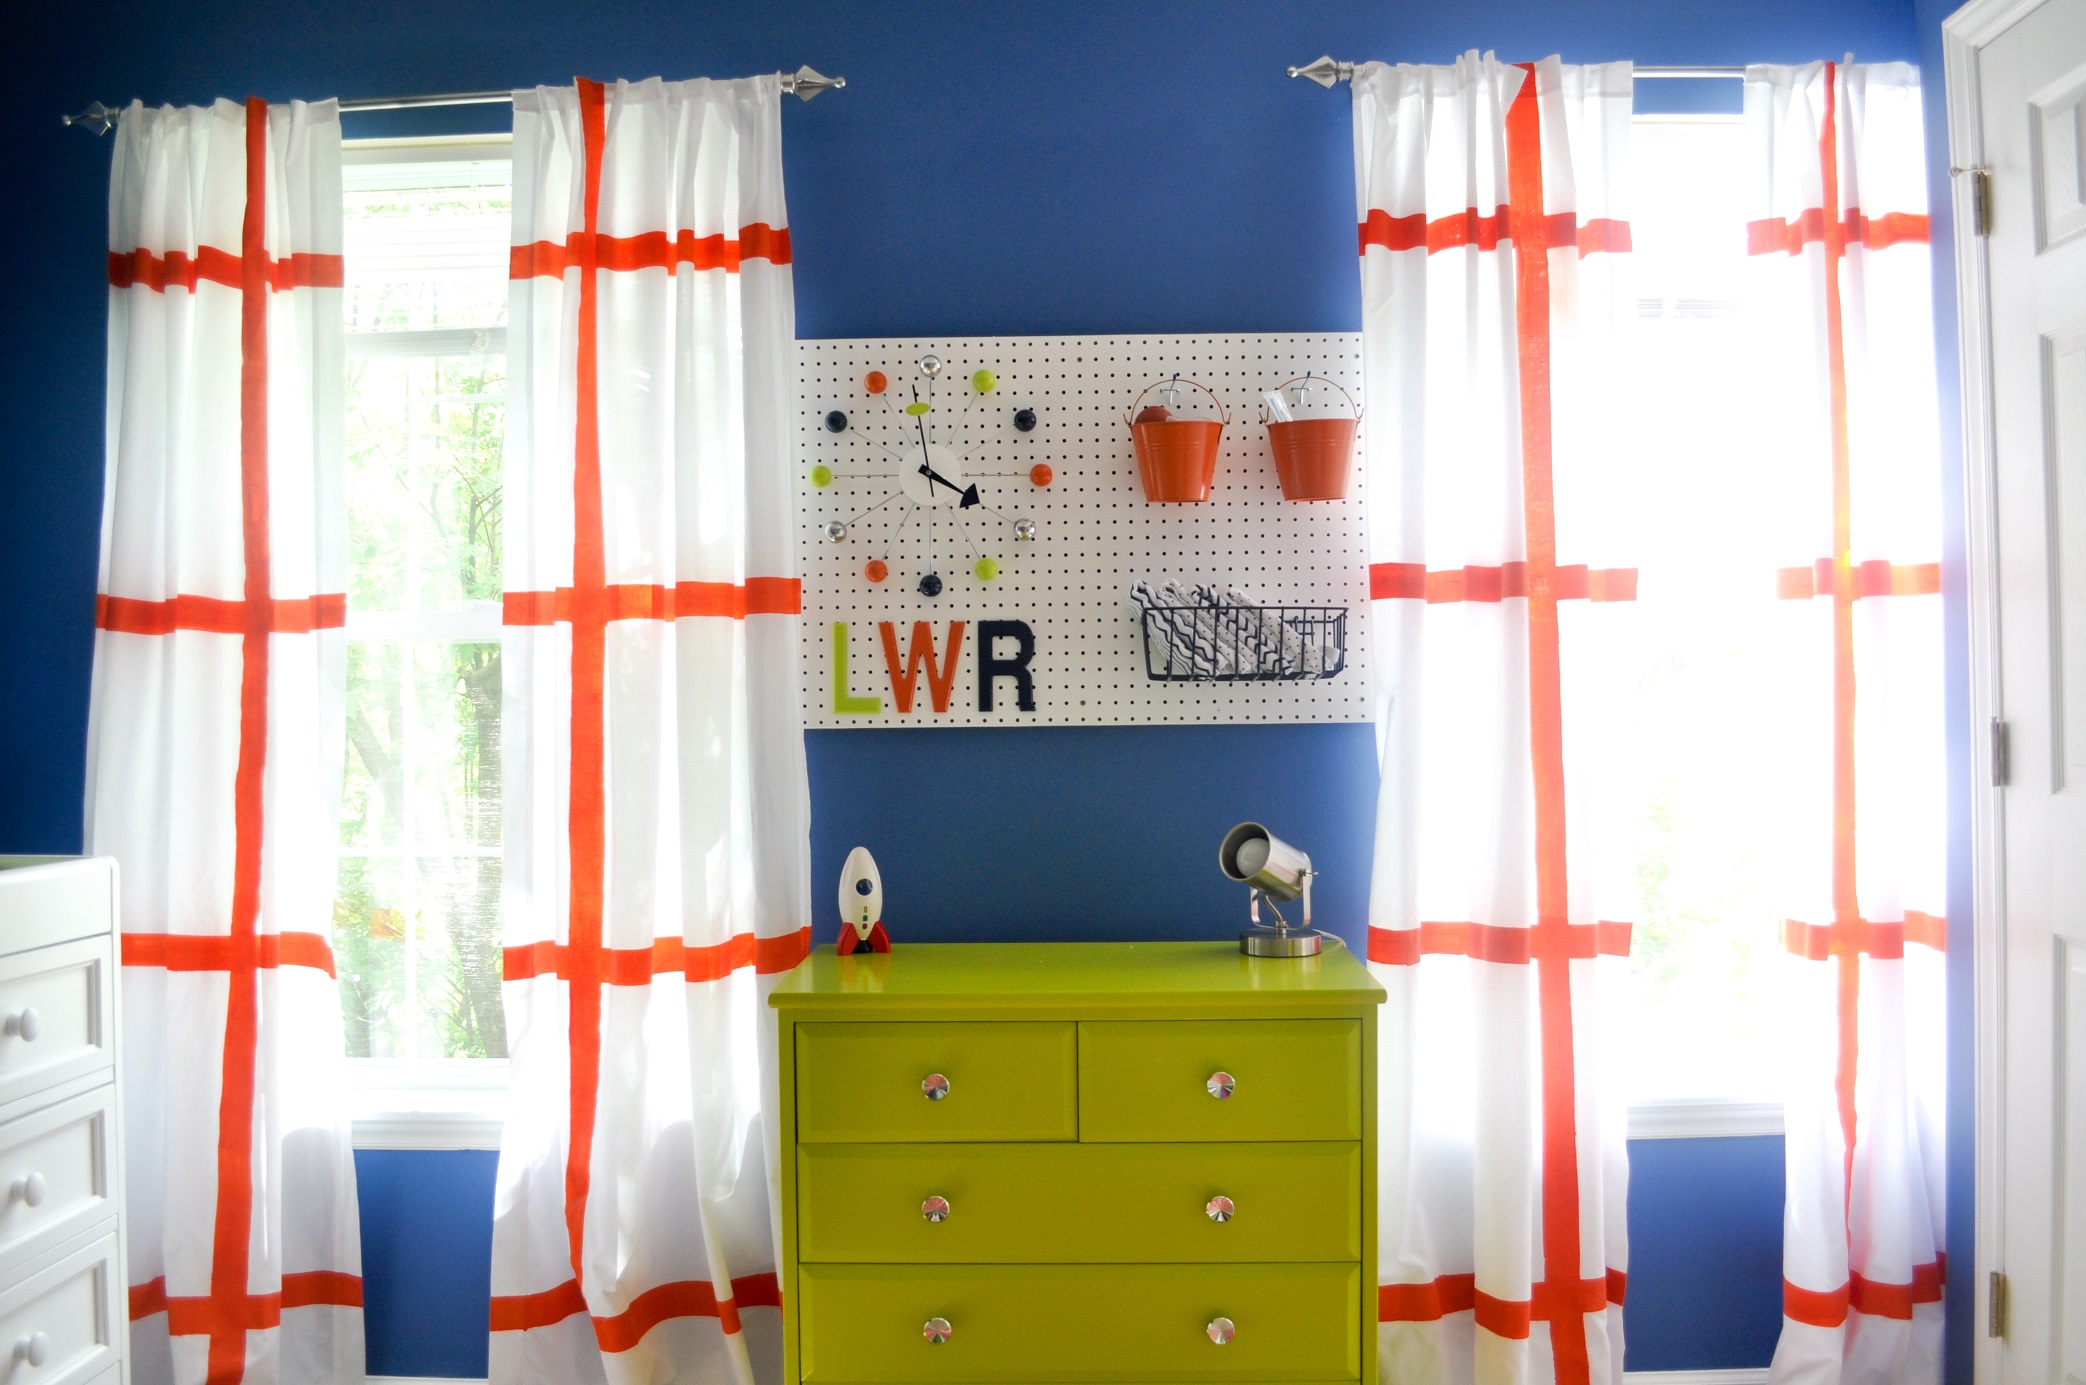 Pegboard for Holding Changing Table Items